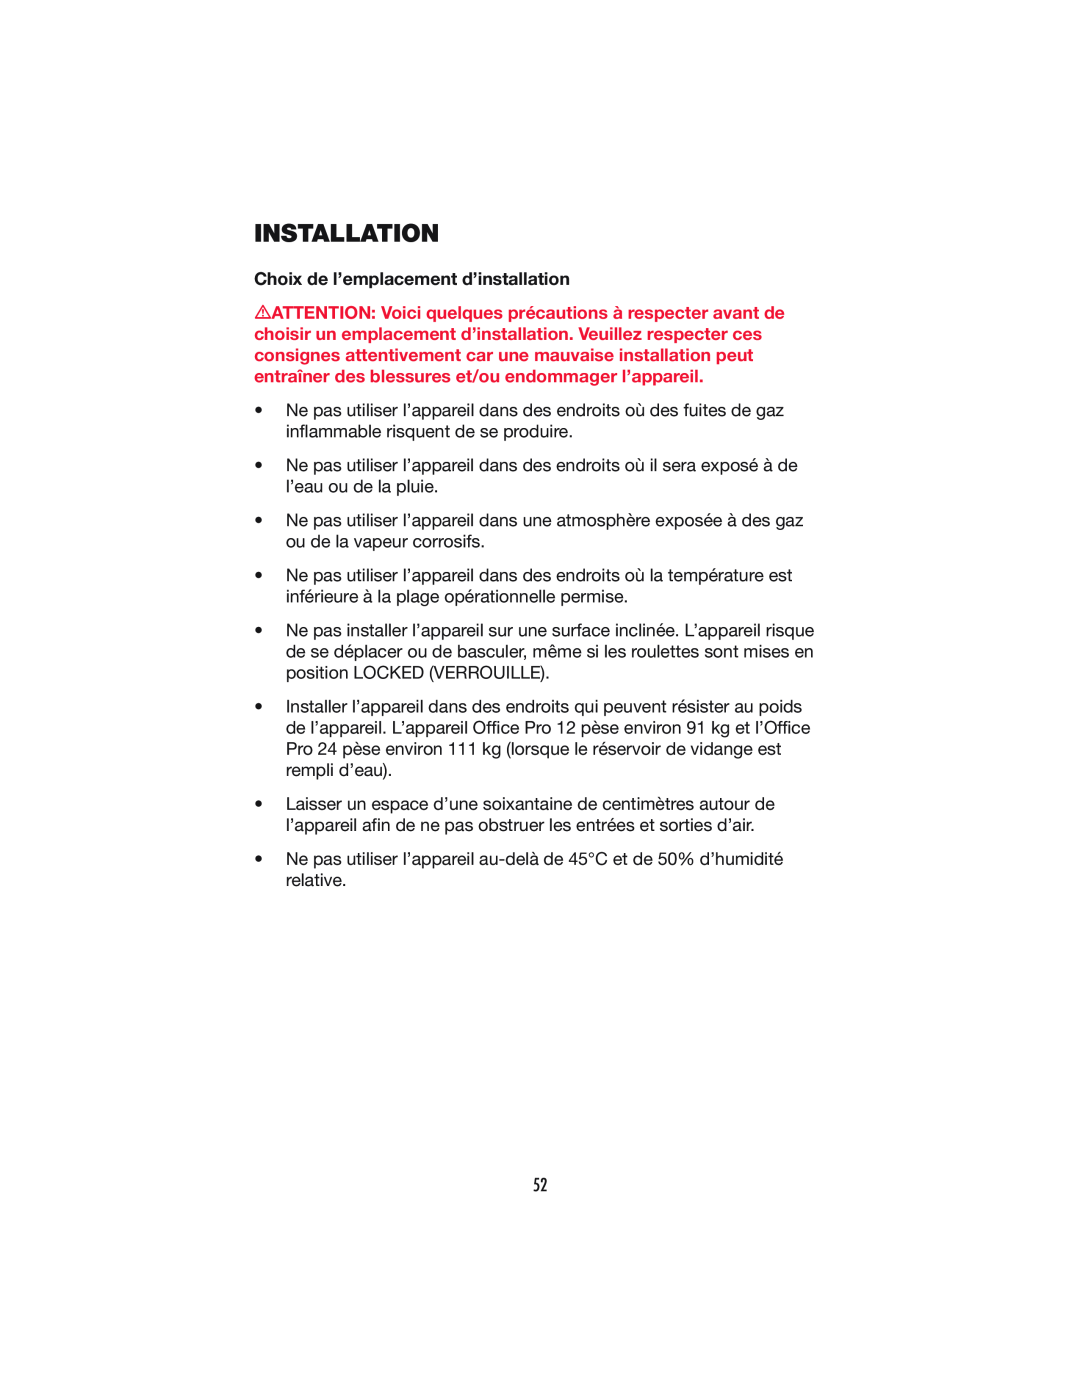 Denso OFFICE PRO 12, OFFICE PRO 24 operation manual Installation, Choix de l’emplacement d’installation 